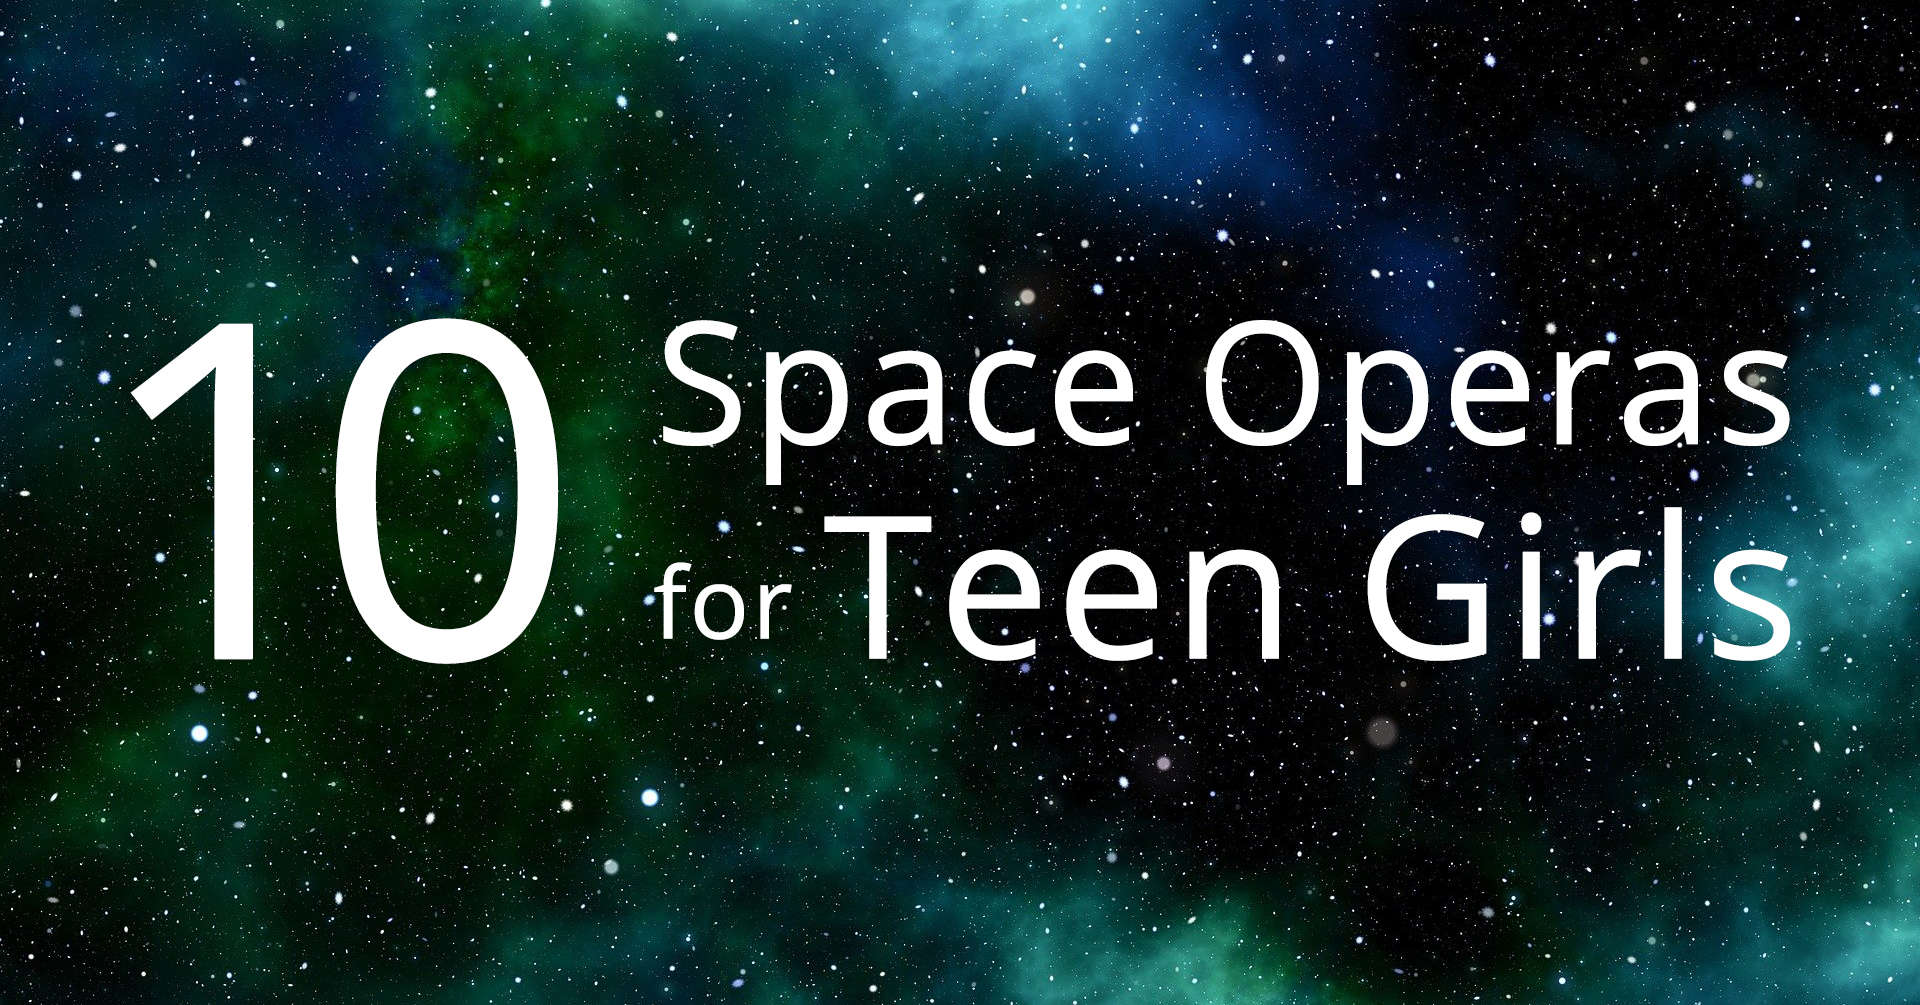 space operas for teen girls